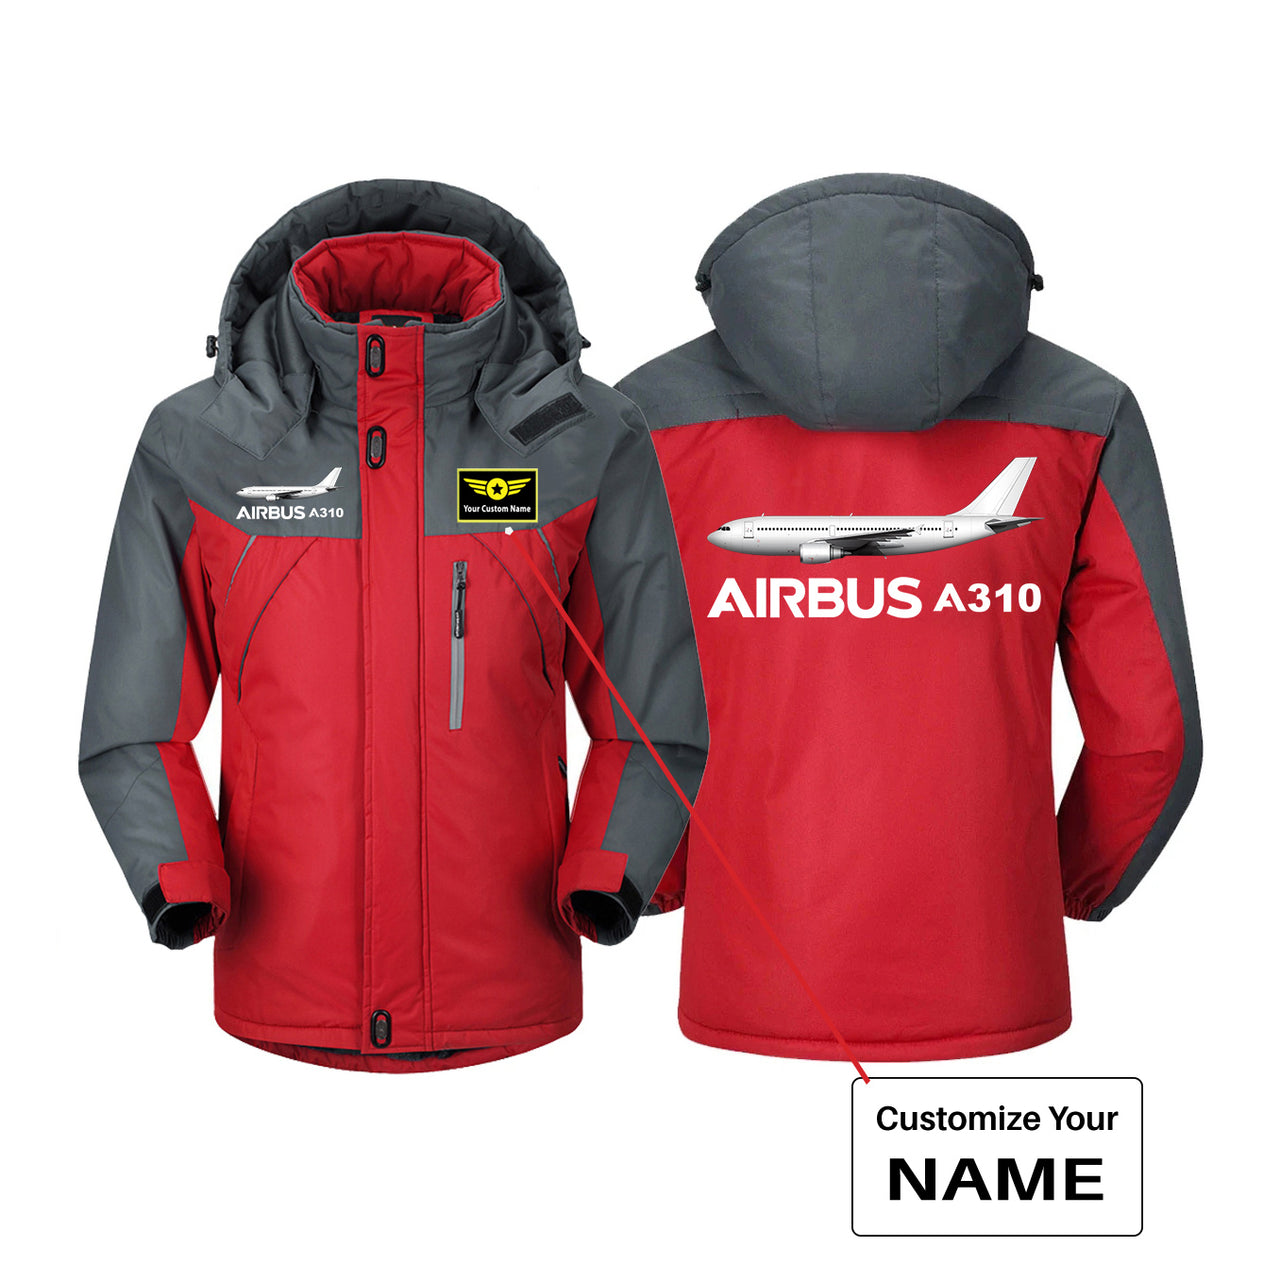 The Airbus A310 Designed Thick Winter Jackets